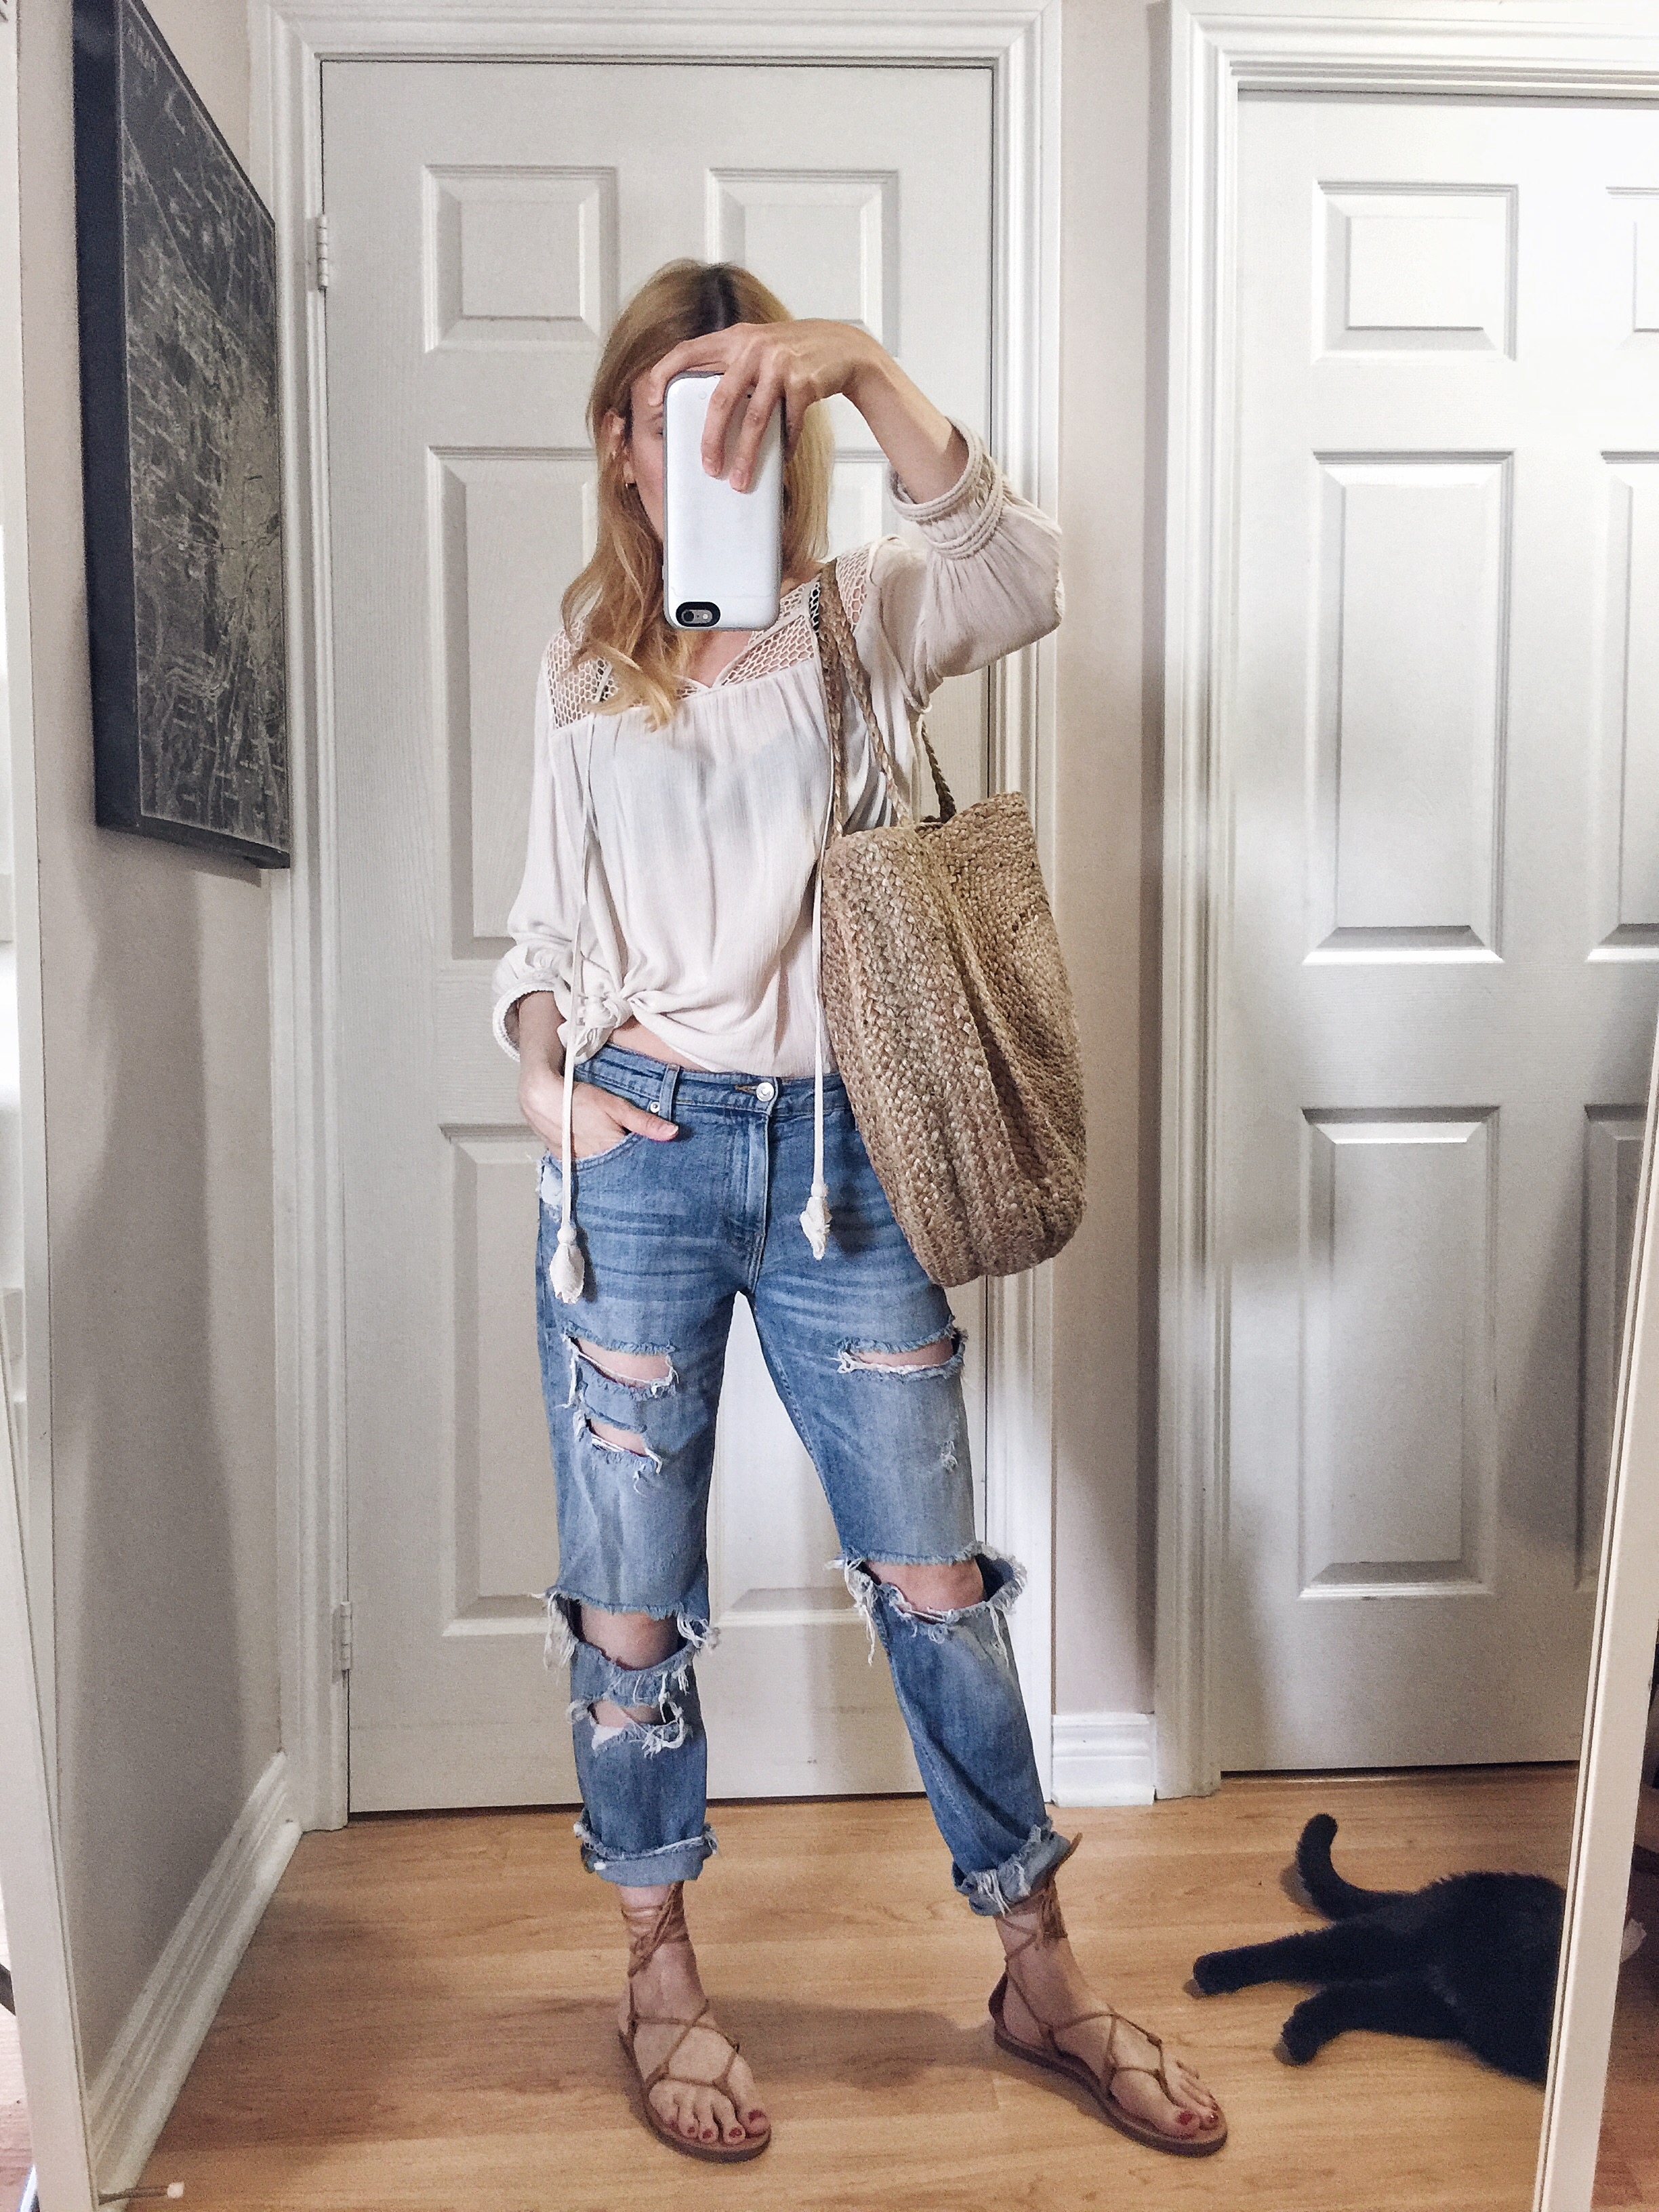 I am wearing a peasant top, boyfriend jeans, Madewell Boardwalk sandals, and a large woven circle purse